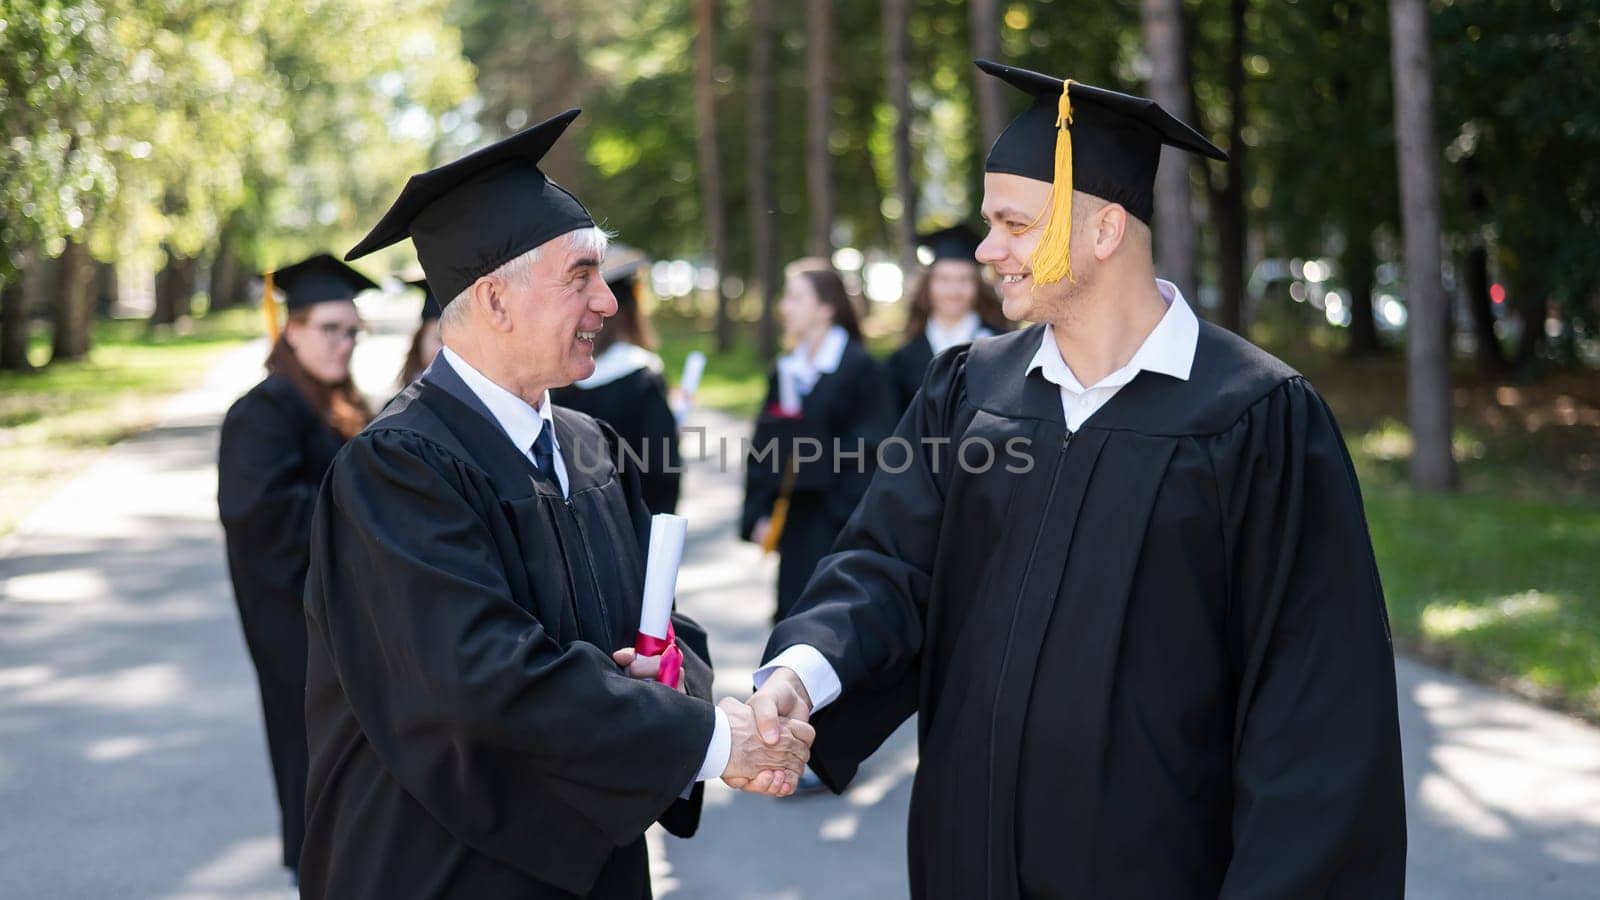 A group of graduates in robes outdoors. An elderly man and a young guy congratulate each other on receiving a diploma. by mrwed54